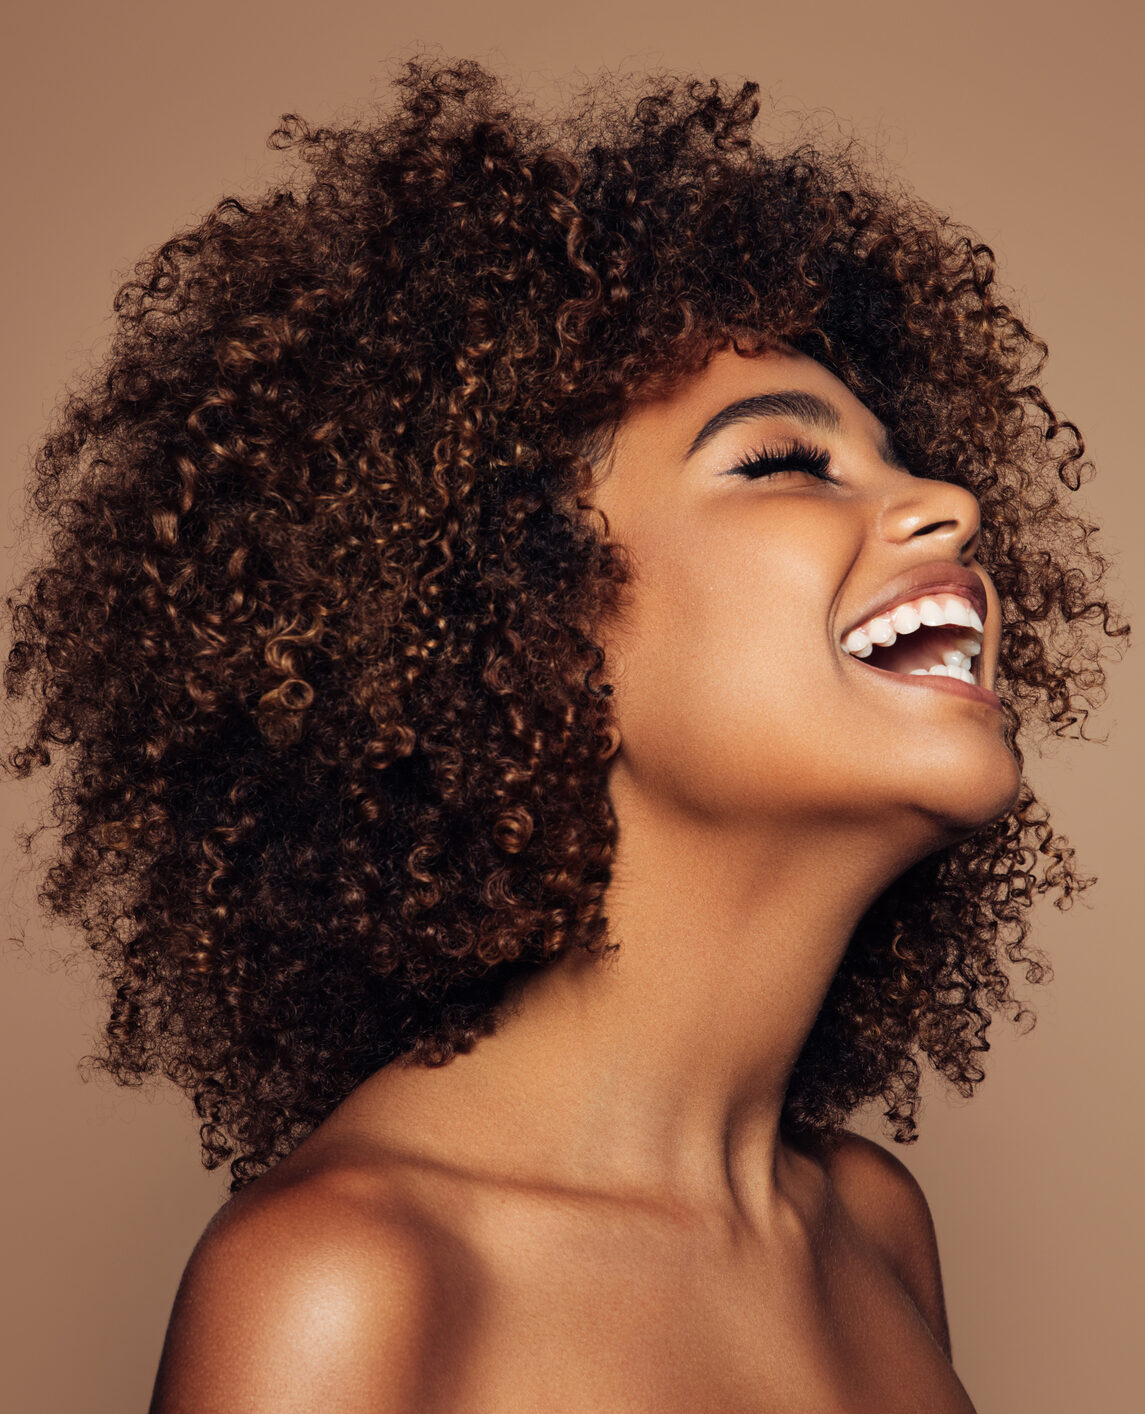 Beautiful happy woman with curly hairstyle